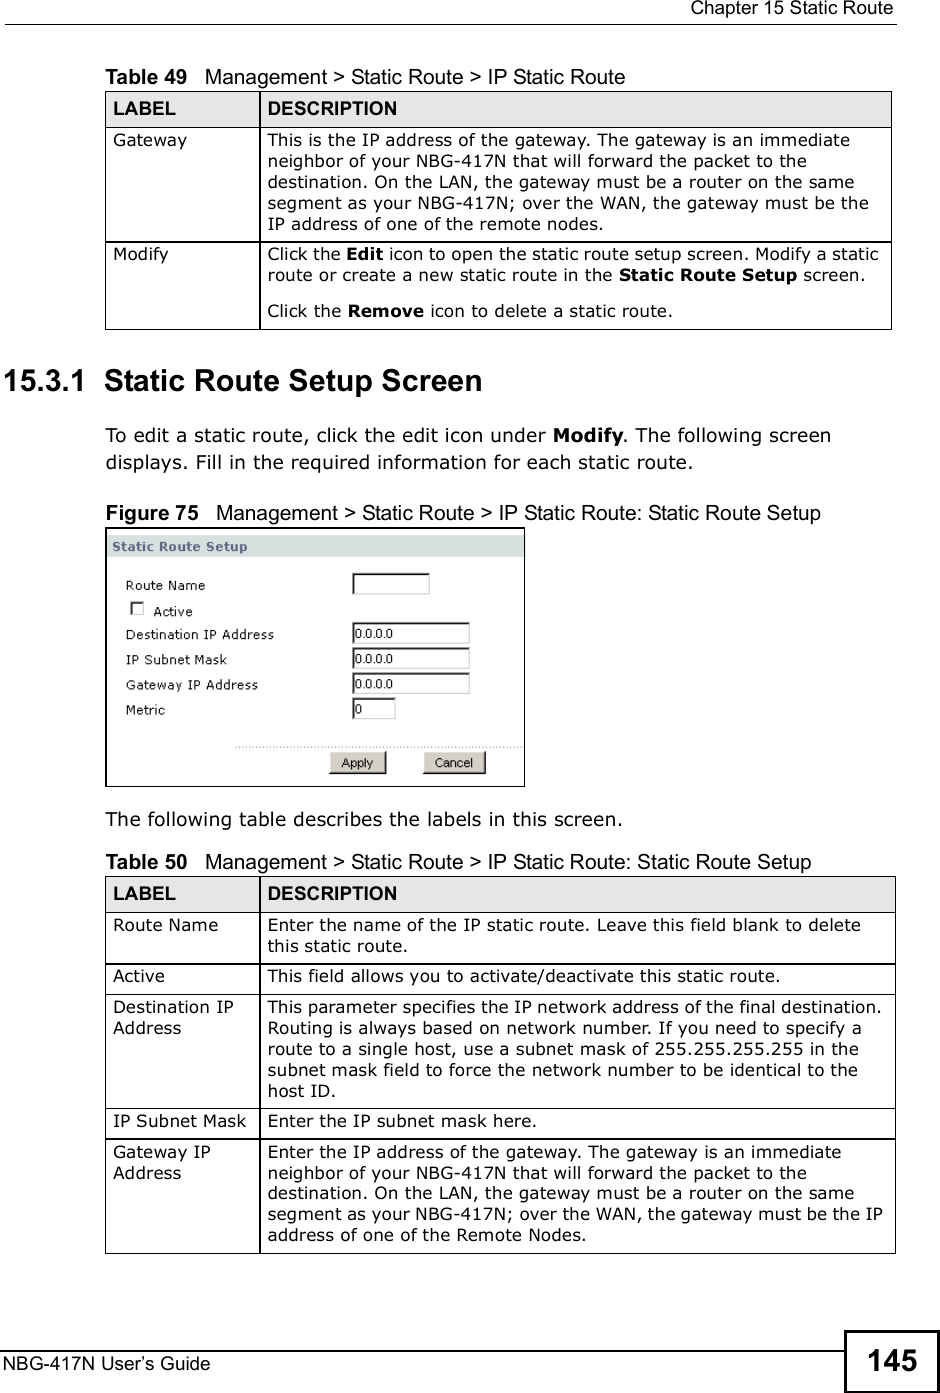  Chapter 15Static RouteNBG-417N User s Guide 14515.3.1  Static Route Setup Screen   To edit a static route, click the edit icon under Modify. The following screen displays. Fill in the required information for each static route.Figure 75   Management &gt; Static Route &gt; IP Static Route: Static Route SetupThe following table describes the labels in this screen.Gateway This is the IP address of the gateway. The gateway is an immediate neighbor of your NBG-417N that will forward the packet to the destination. On the LAN, the gateway must be a router on the same segment as your NBG-417N; over the WAN, the gateway must be the IP address of one of the remote nodes.Modify Click the Edit icon to open the static route setup screen. Modify a static route or create a new static route in the Static Route Setup screen.Click the Remove icon to delete a static route.Table 49   Management &gt; Static Route &gt; IP Static RouteLABEL DESCRIPTIONTable 50   Management &gt; Static Route &gt; IP Static Route: Static Route SetupLABEL DESCRIPTIONRoute Name Enter the name of the IP static route. Leave this field blank to delete this static route.Active This field allows you to activate/deactivate this static route.Destination IP AddressThis parameter specifies the IP network address of the final destination. Routing is always based on network number. If you need to specify a route to a single host, use a subnet mask of 255.255.255.255 in the subnet mask field to force the network number to be identical to the host ID.IP Subnet Mask  Enter the IP subnet mask here.Gateway IP AddressEnter the IP address of the gateway. The gateway is an immediate neighbor of your NBG-417N that will forward the packet to the destination. On the LAN, the gateway must be a router on the same segment as your NBG-417N; over the WAN, the gateway must be the IP address of one of the Remote Nodes.